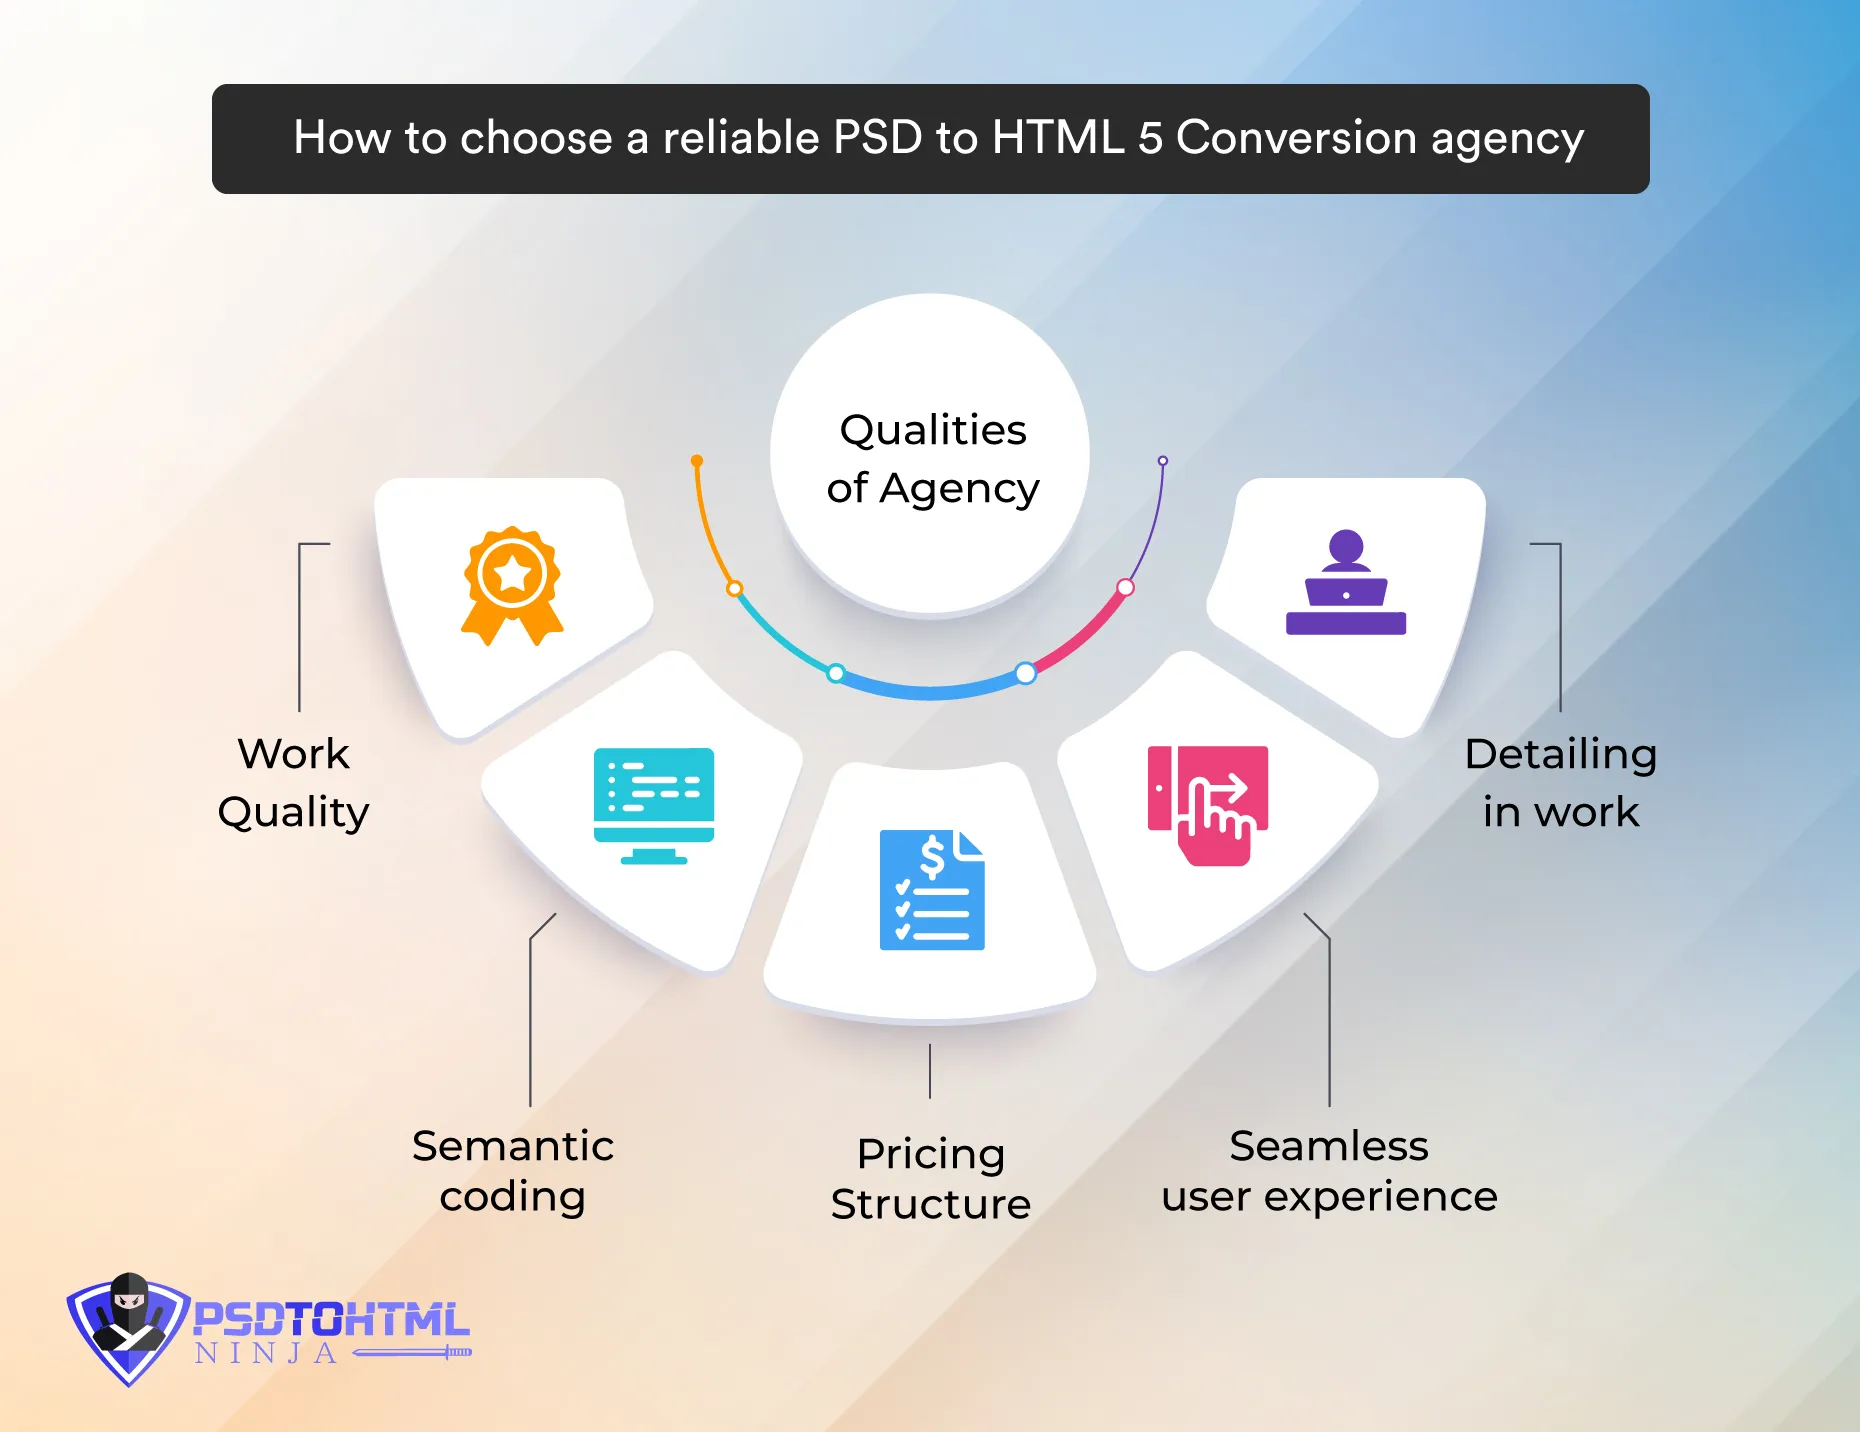 How to Choose a Reliable PSD to HTML 5 Conversion Agency